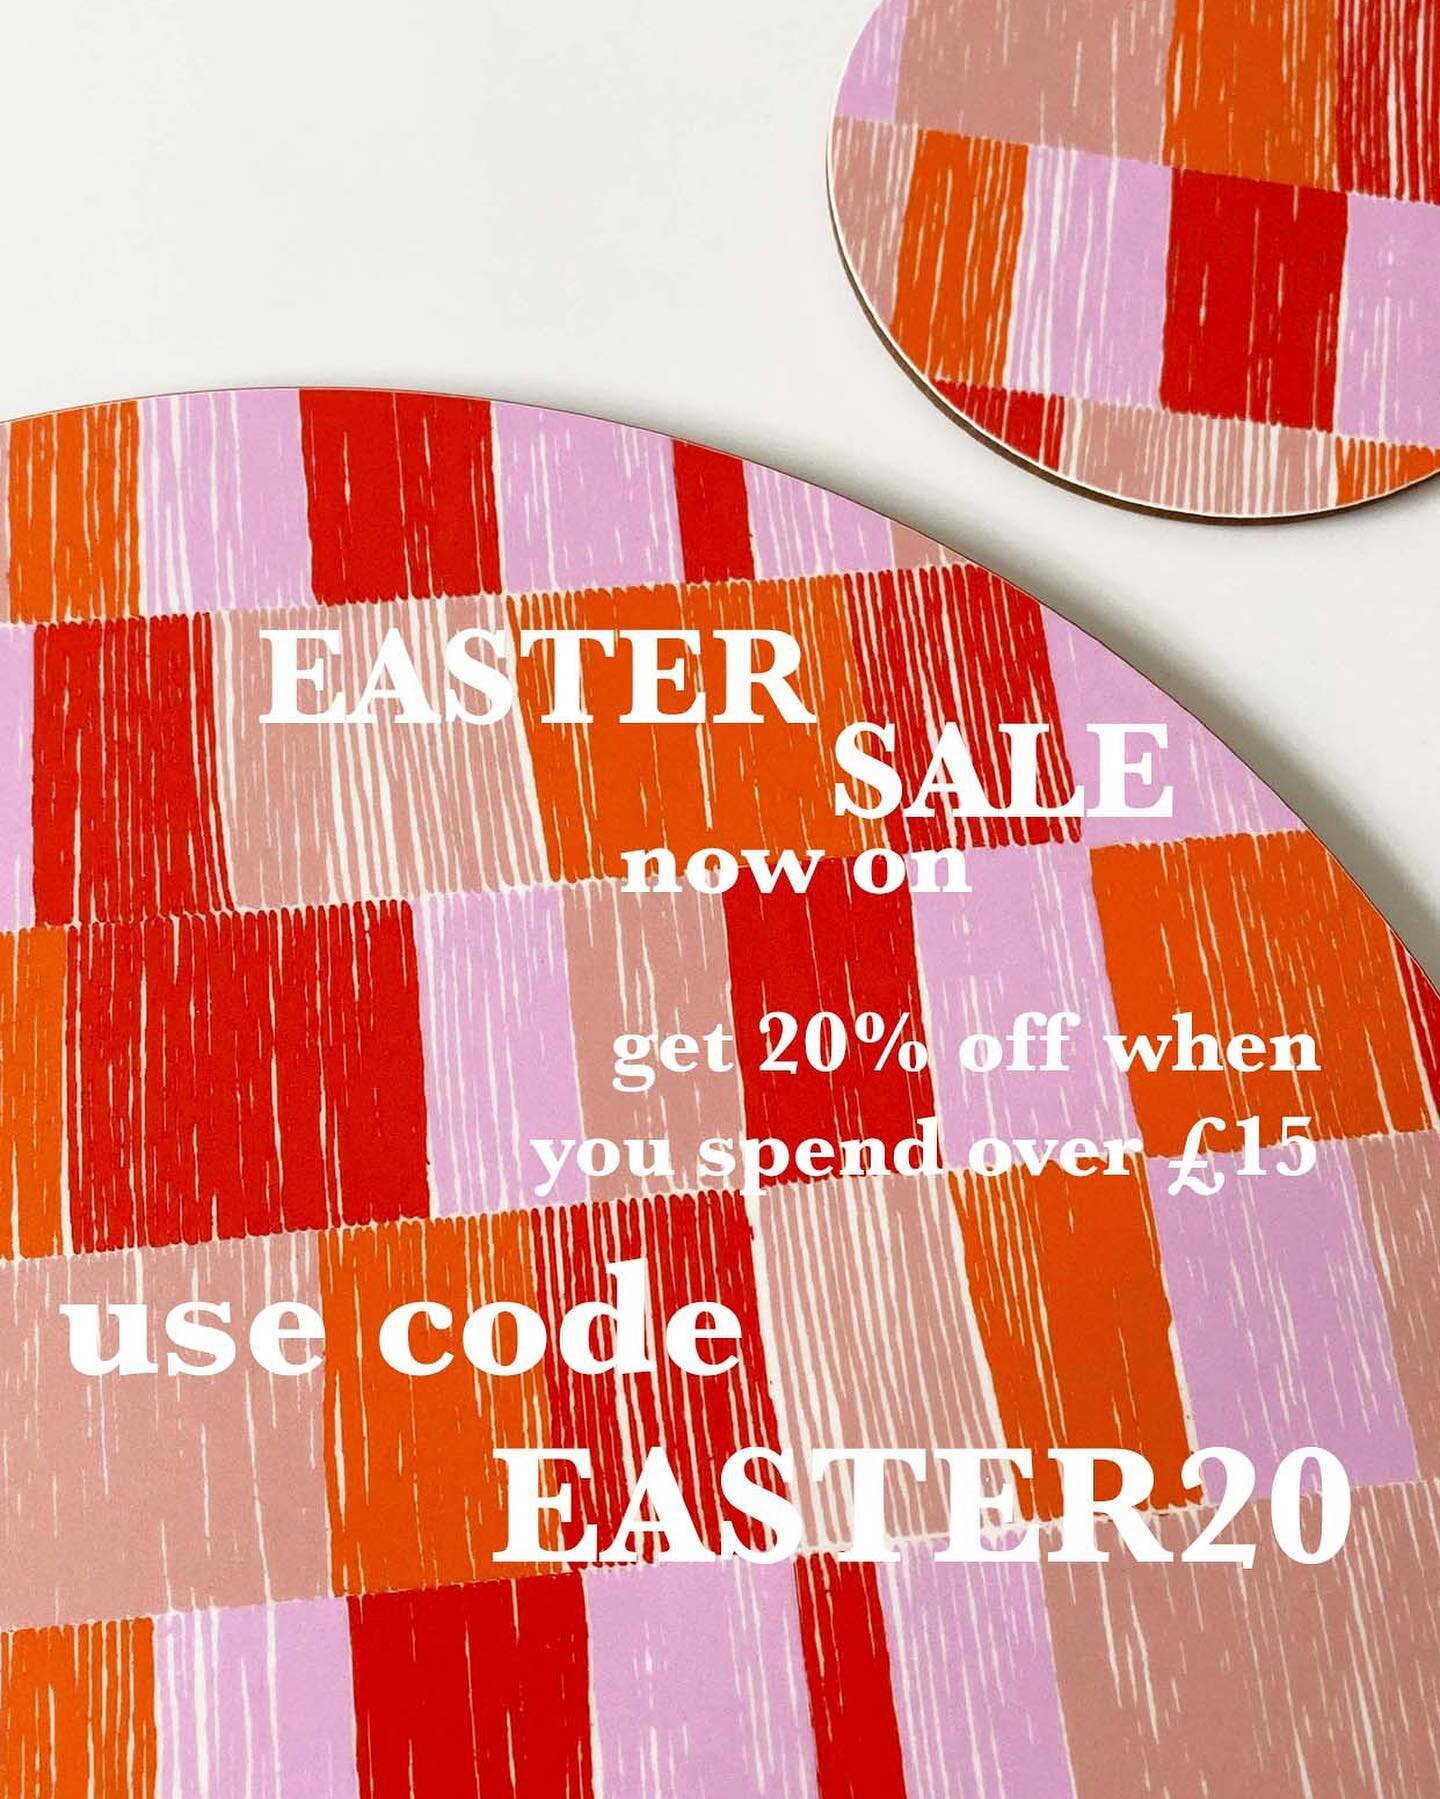 &bull;last day to shop the Easter sale and get 20% off orders over &pound;15 with the code EASTER20&bull;

&bull;thank you so much for all your orders already&bull; 

✨shop through the link in the bio✨